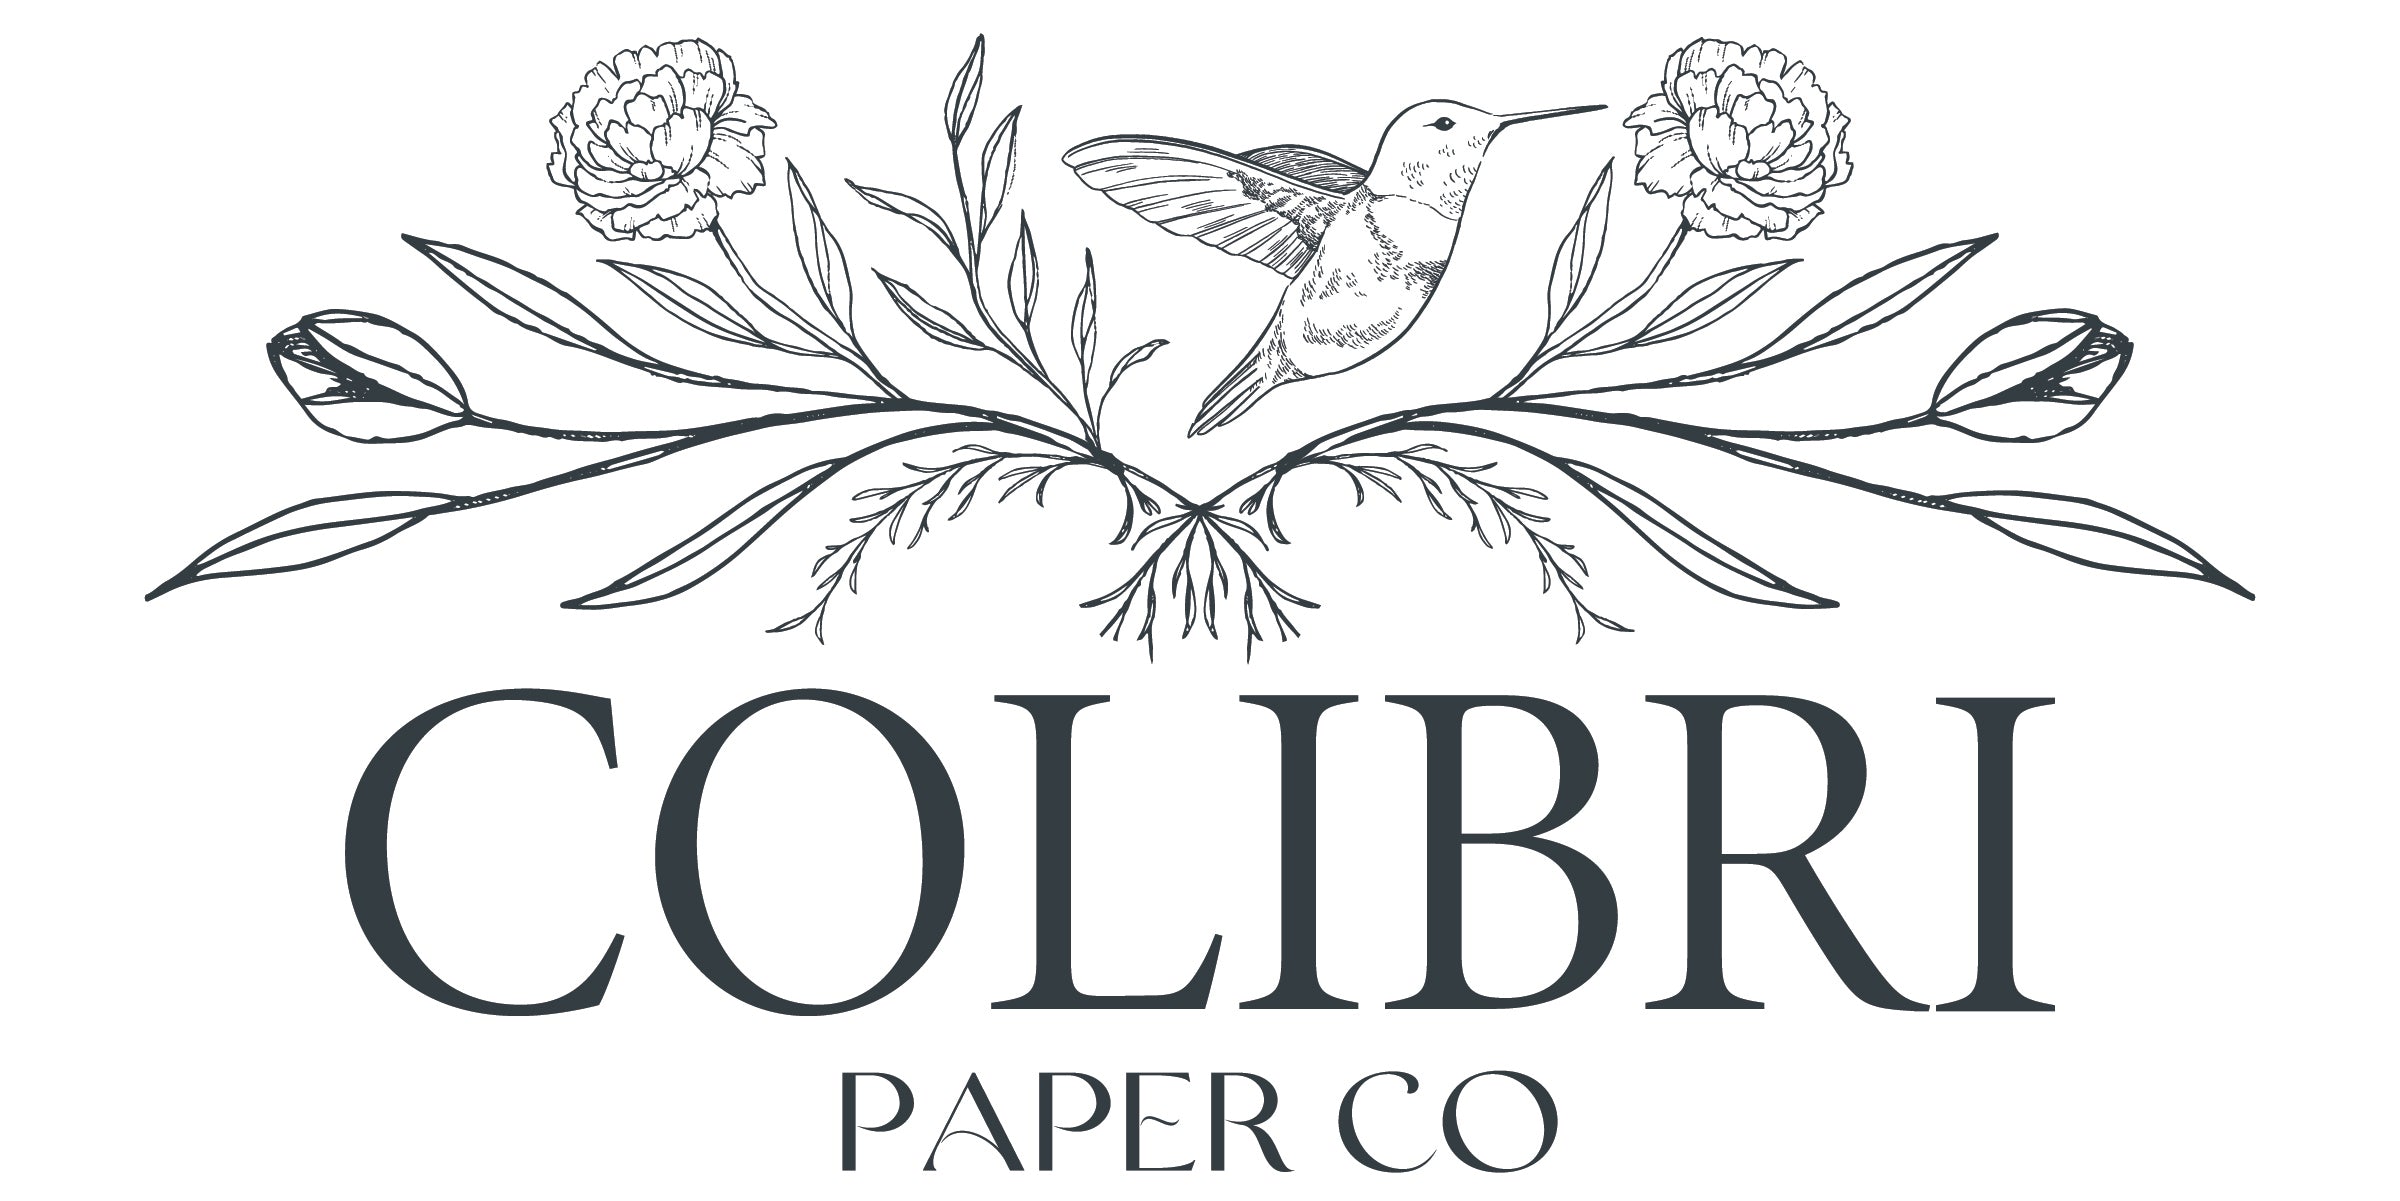 Personalized Daily & Weekly Planners, Stationery - Colibri Paper Co